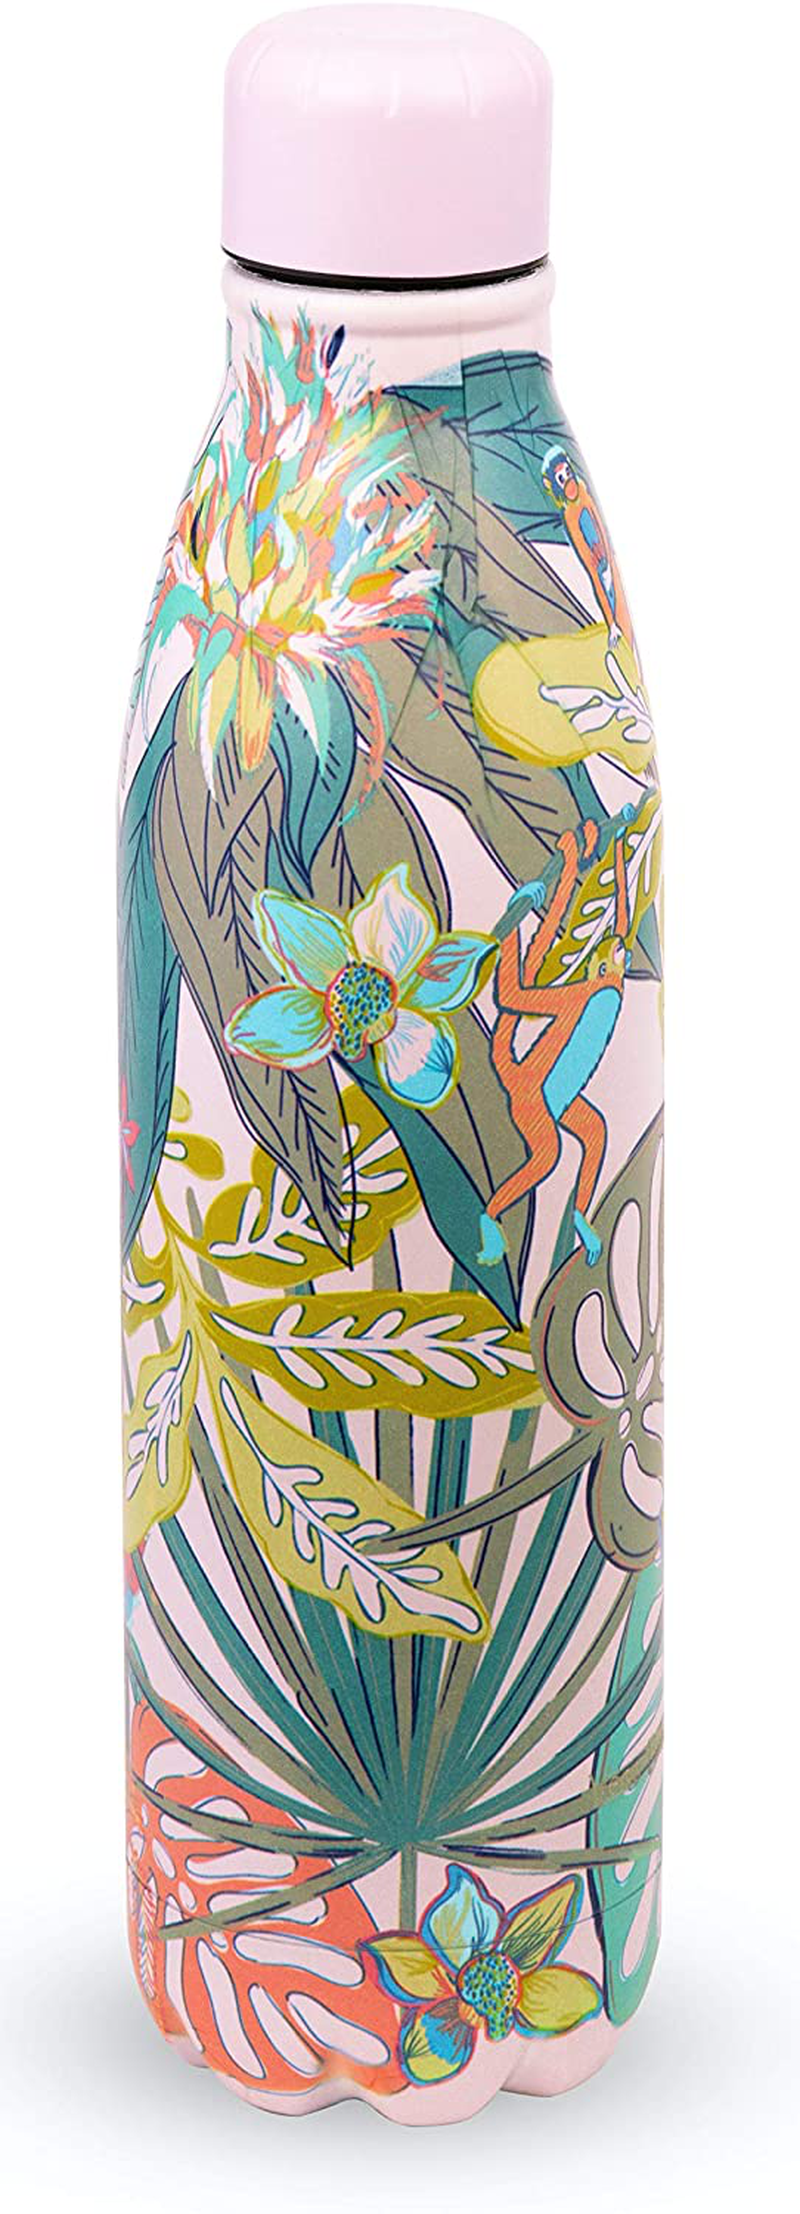 Vera Bradley Stainless Steel Insulated Water Bottle, 17 Ounce Travel Tumbler with Lid for Sports, Gym, School